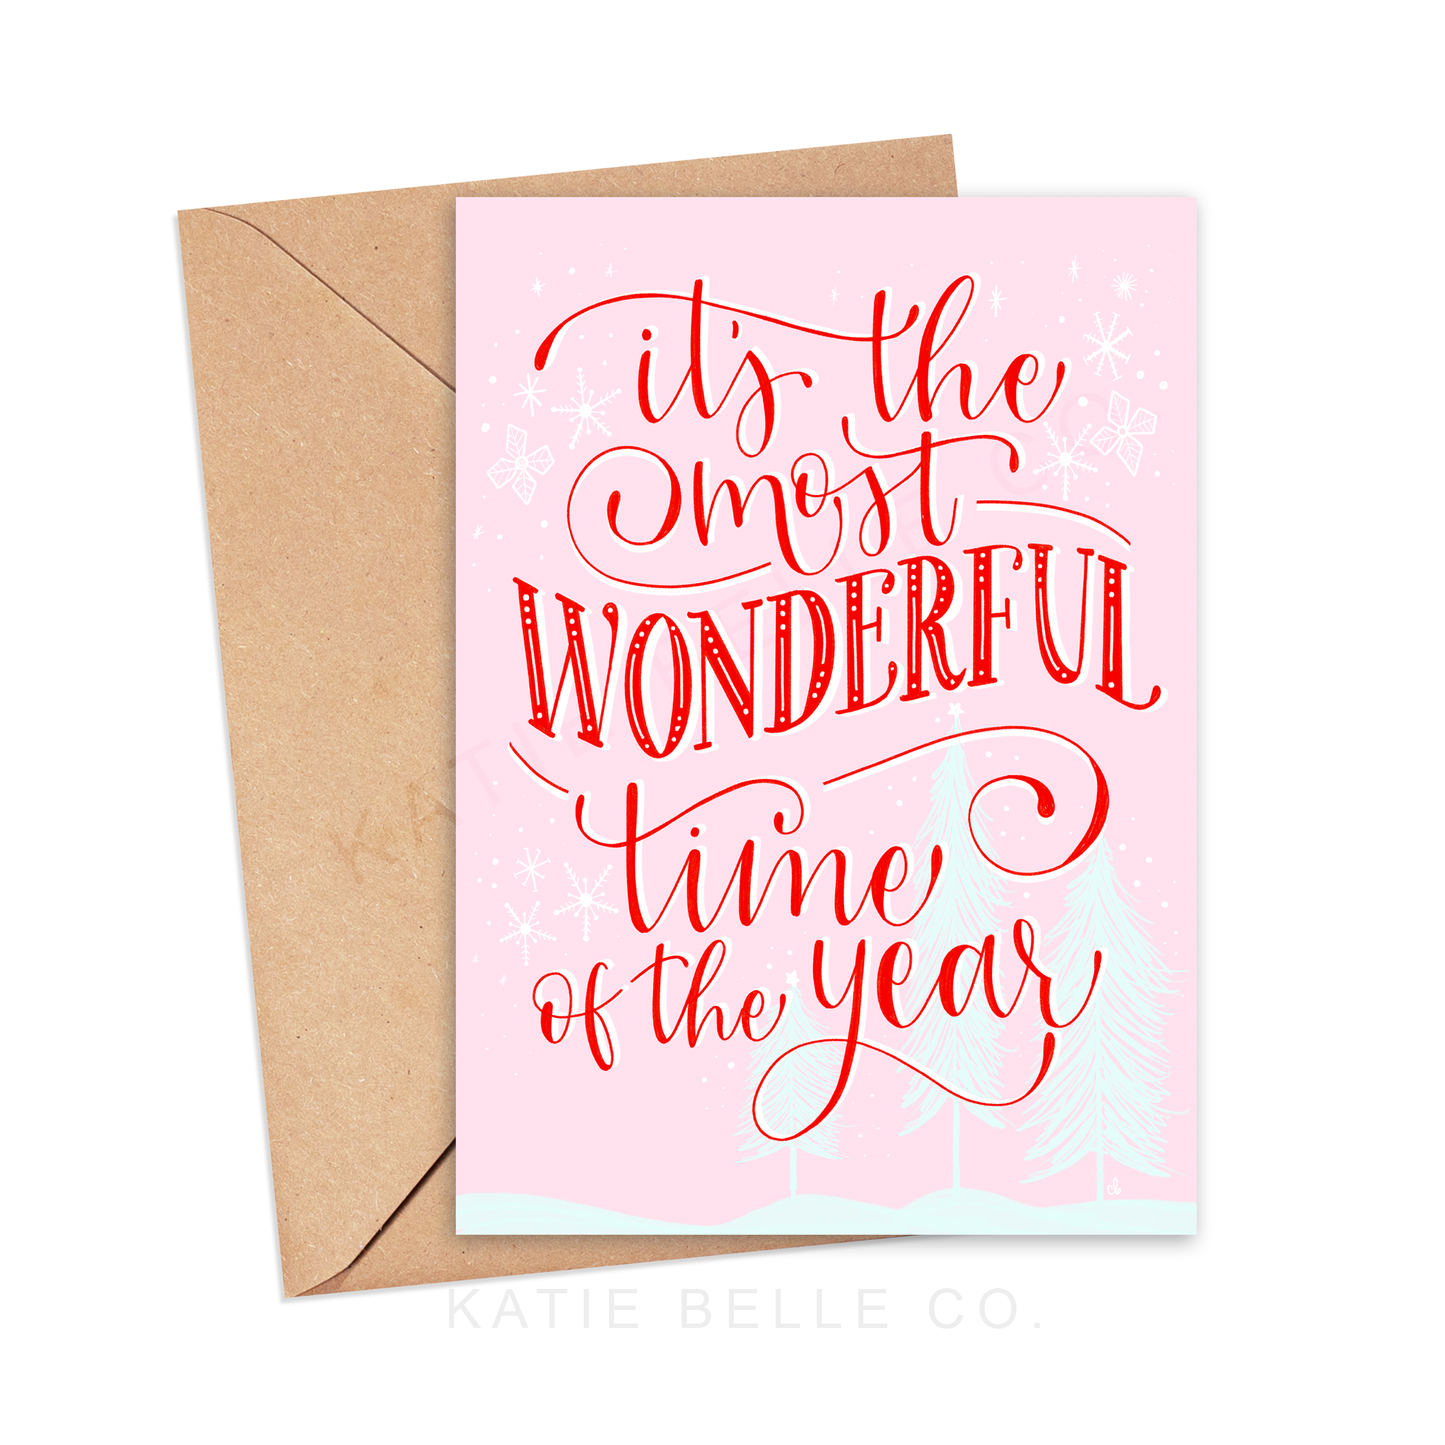 Its the most wonderful time of the year. Greeting  card. christmas card. Holiday cards. Seasons greetings. holiday wishes. Pink christmas. A2 size. vertical design. Red hand lettered scrip. Made by katie belle co. 